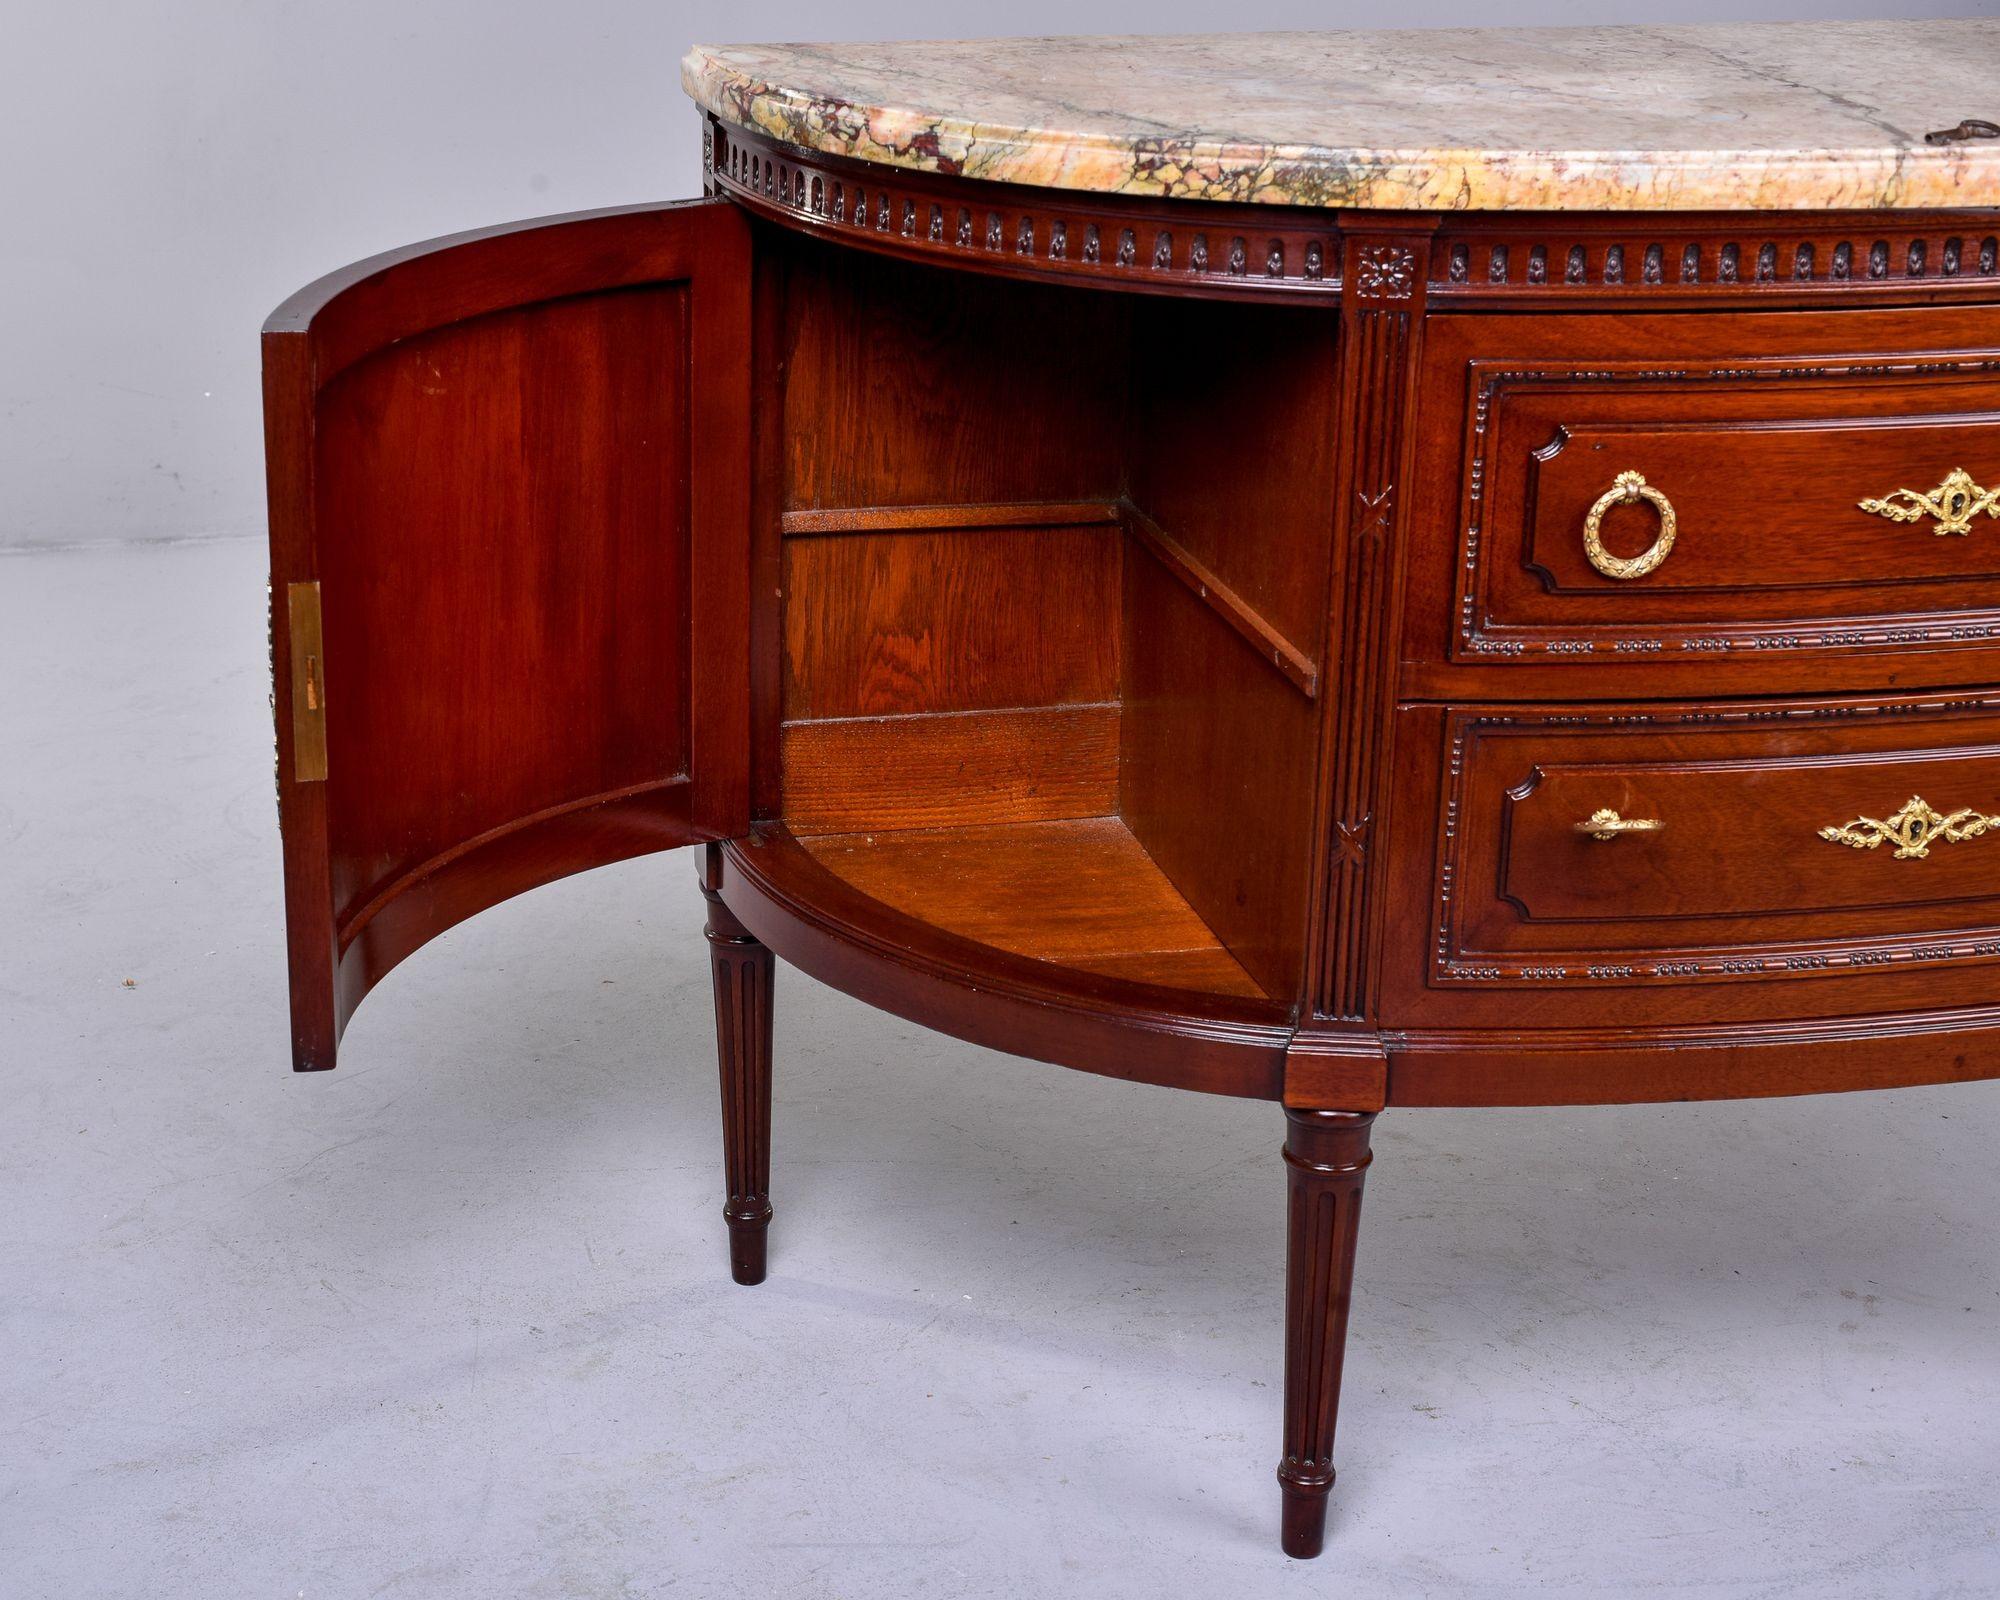 20th Century Empire Style Demi Lune Marble Topped Two Door Commode with Two Drawers For Sale